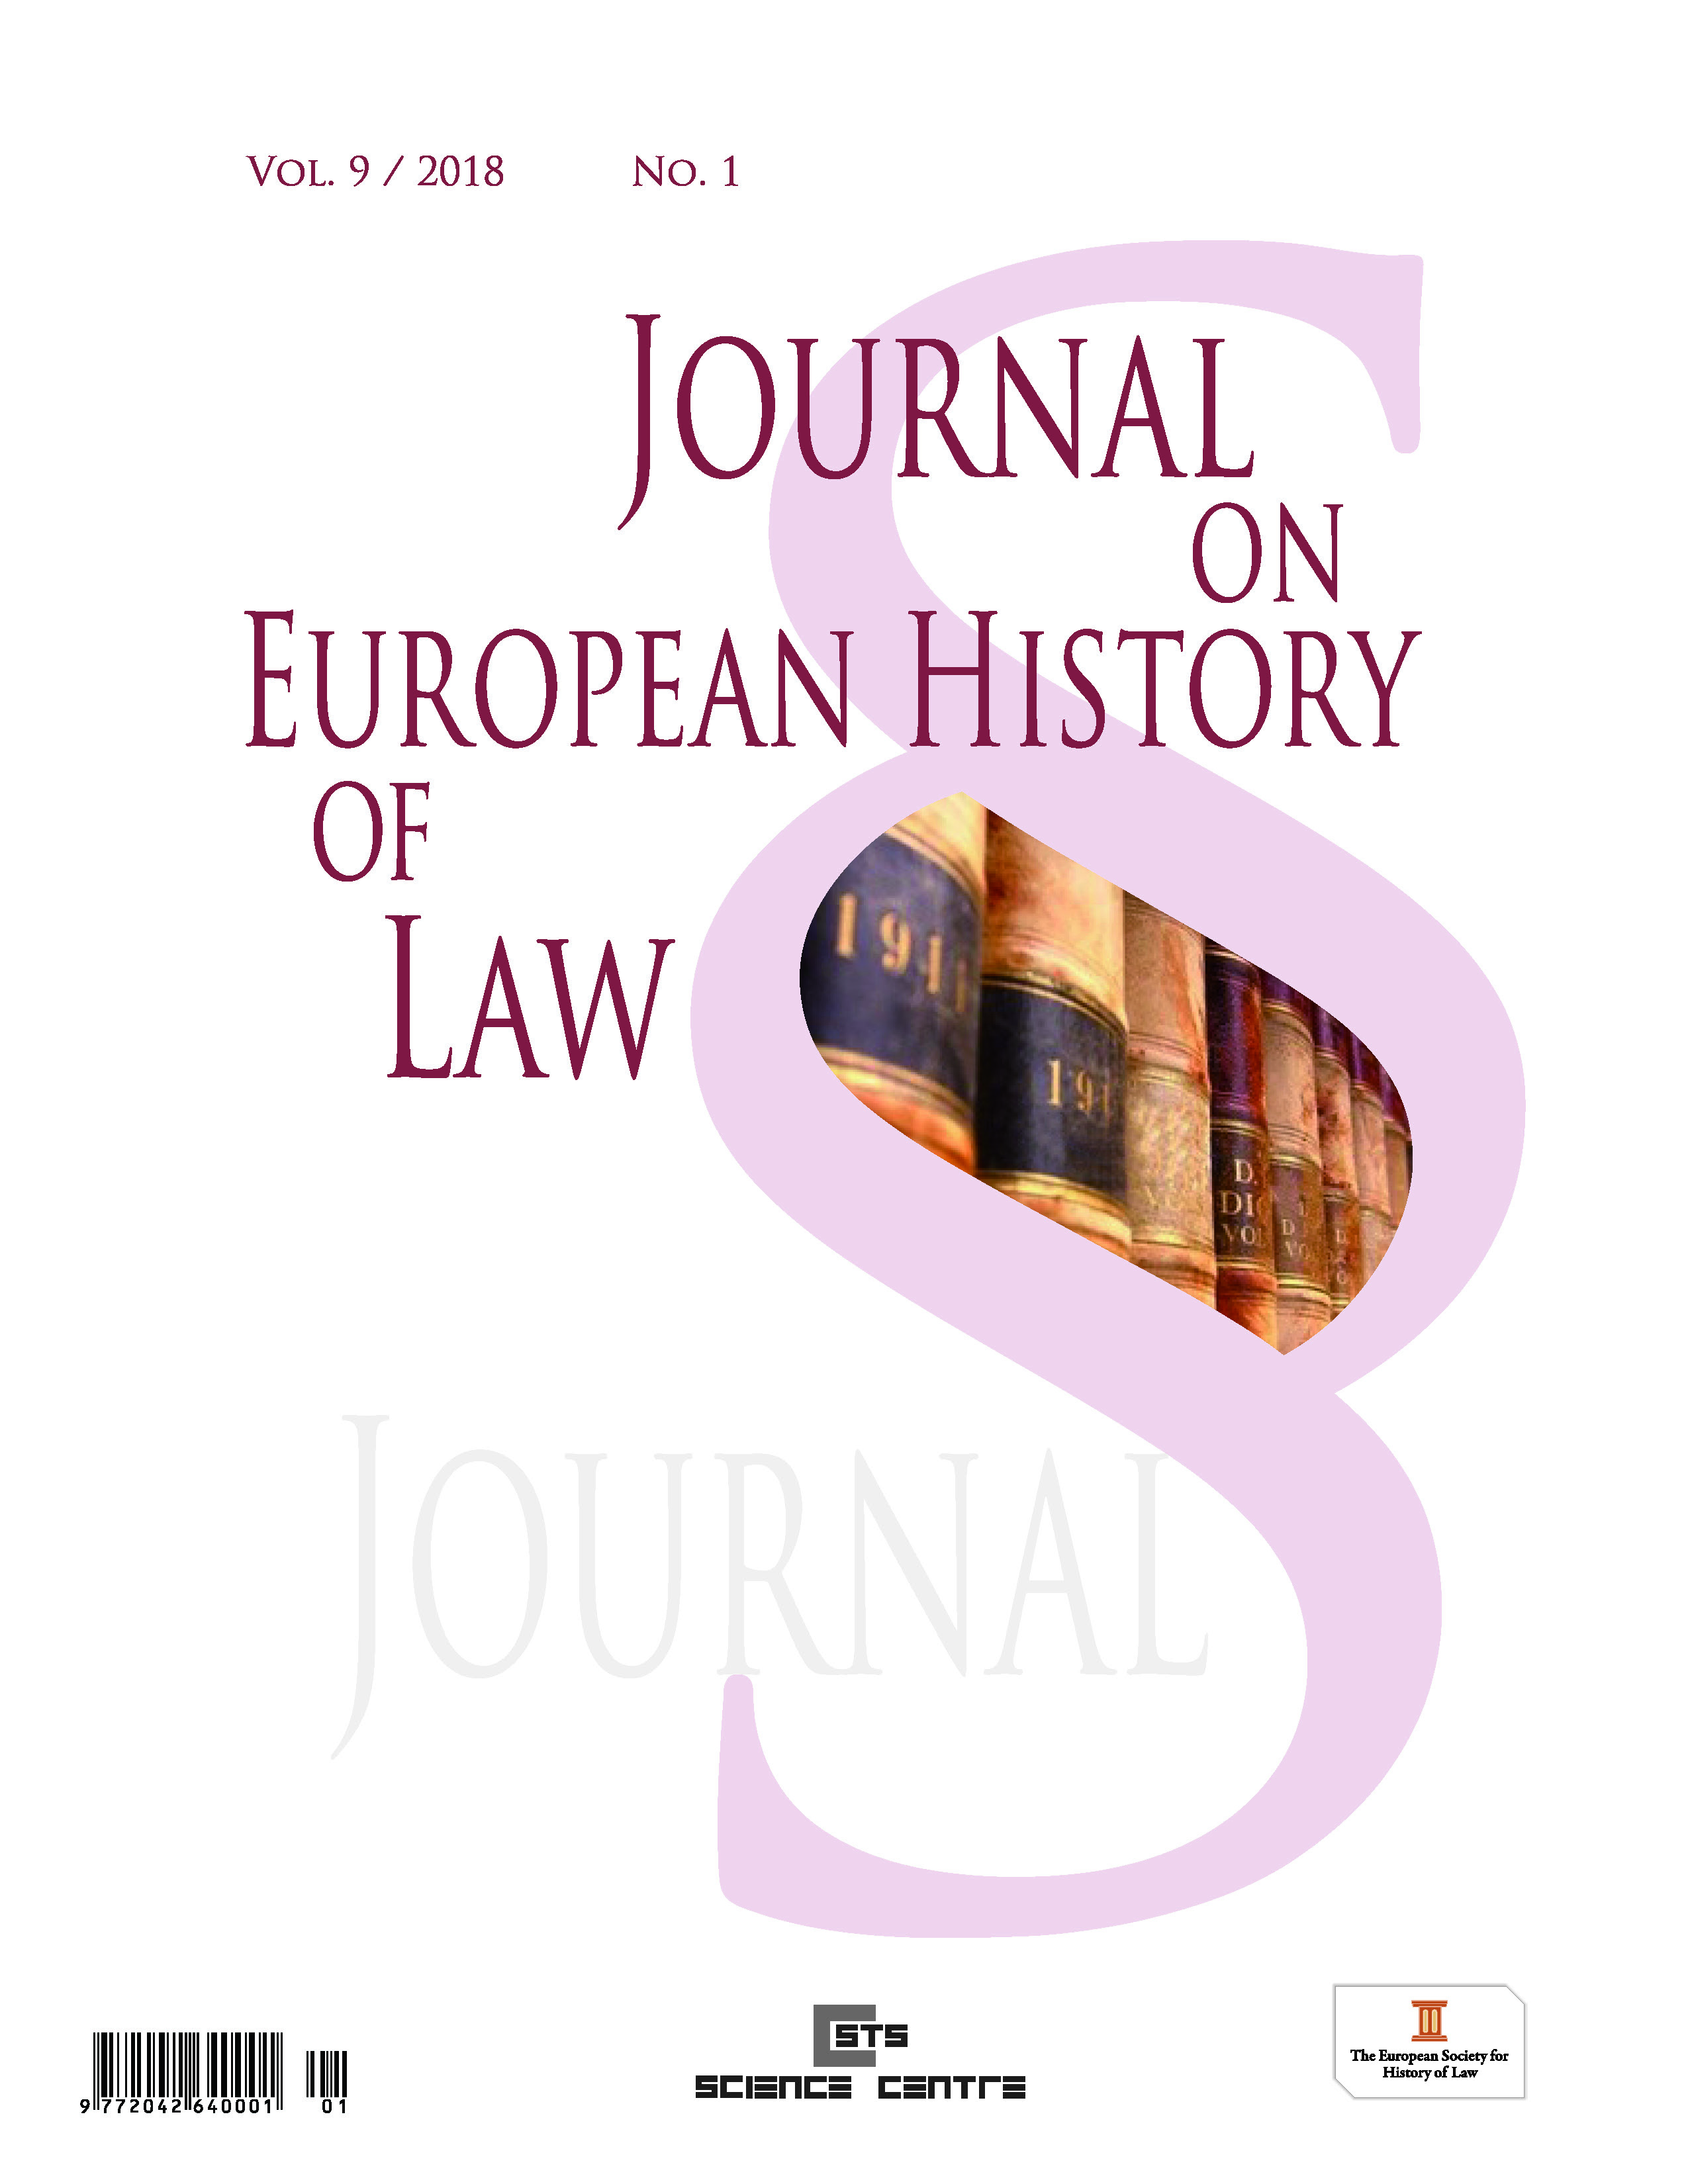 Historical and Criminal Law Aspects of Safeguarding Road Safety in Albania